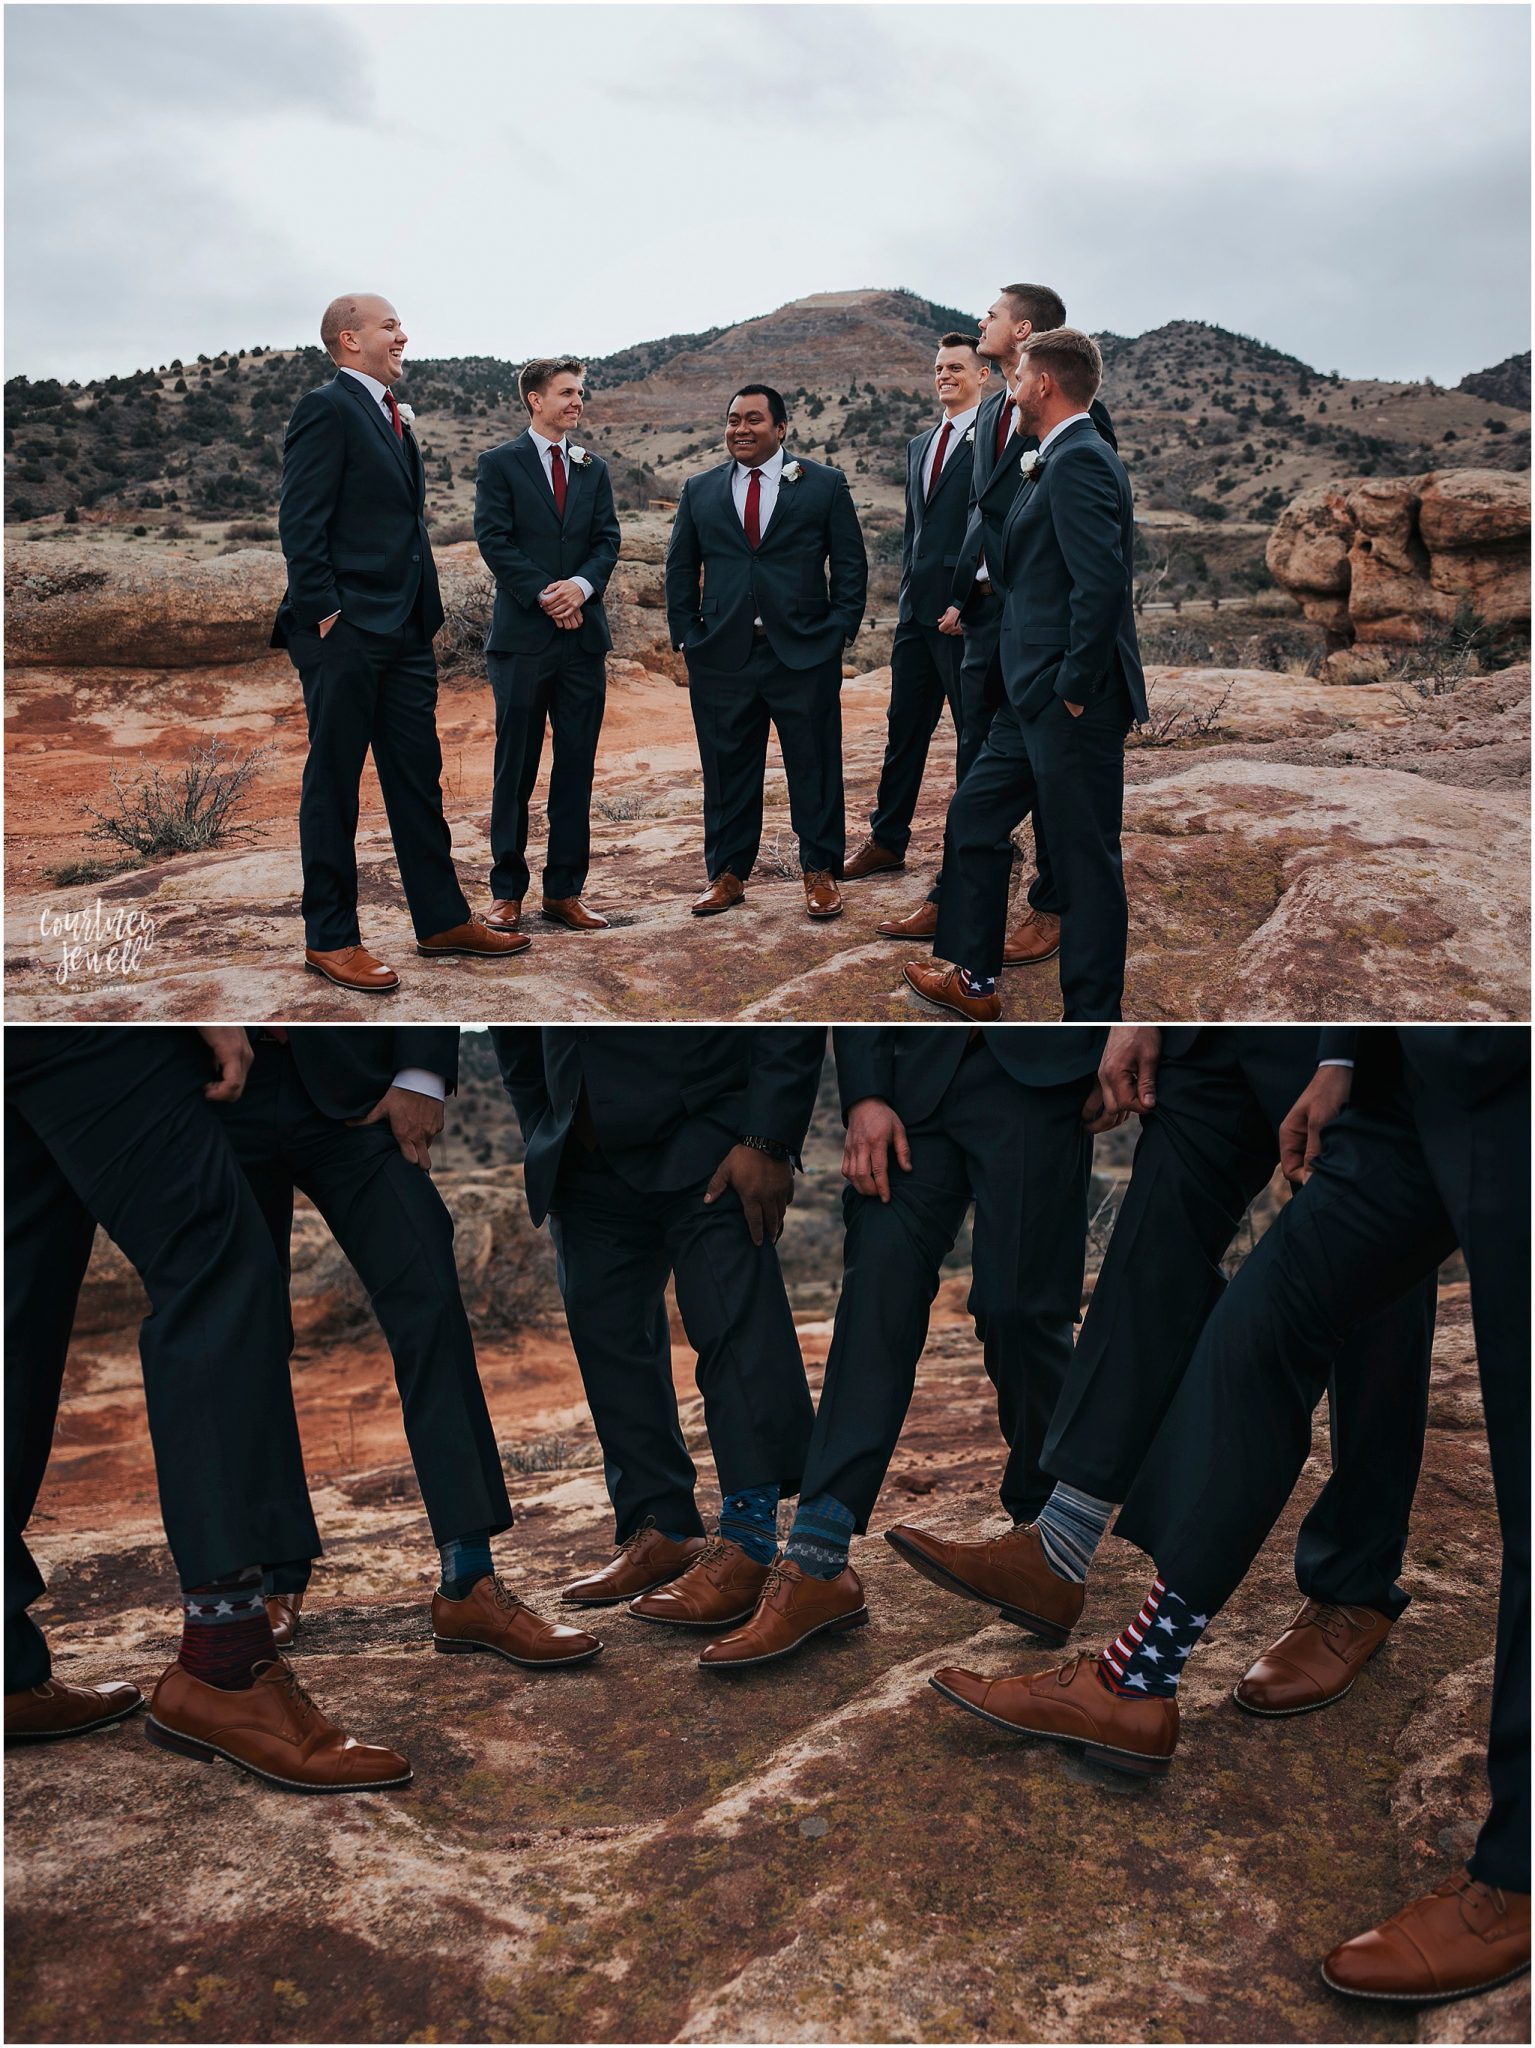 Denver, colorado, wedding, photography, golden, rustic, vintage, outdoor, ceremony, son, first look, first touch